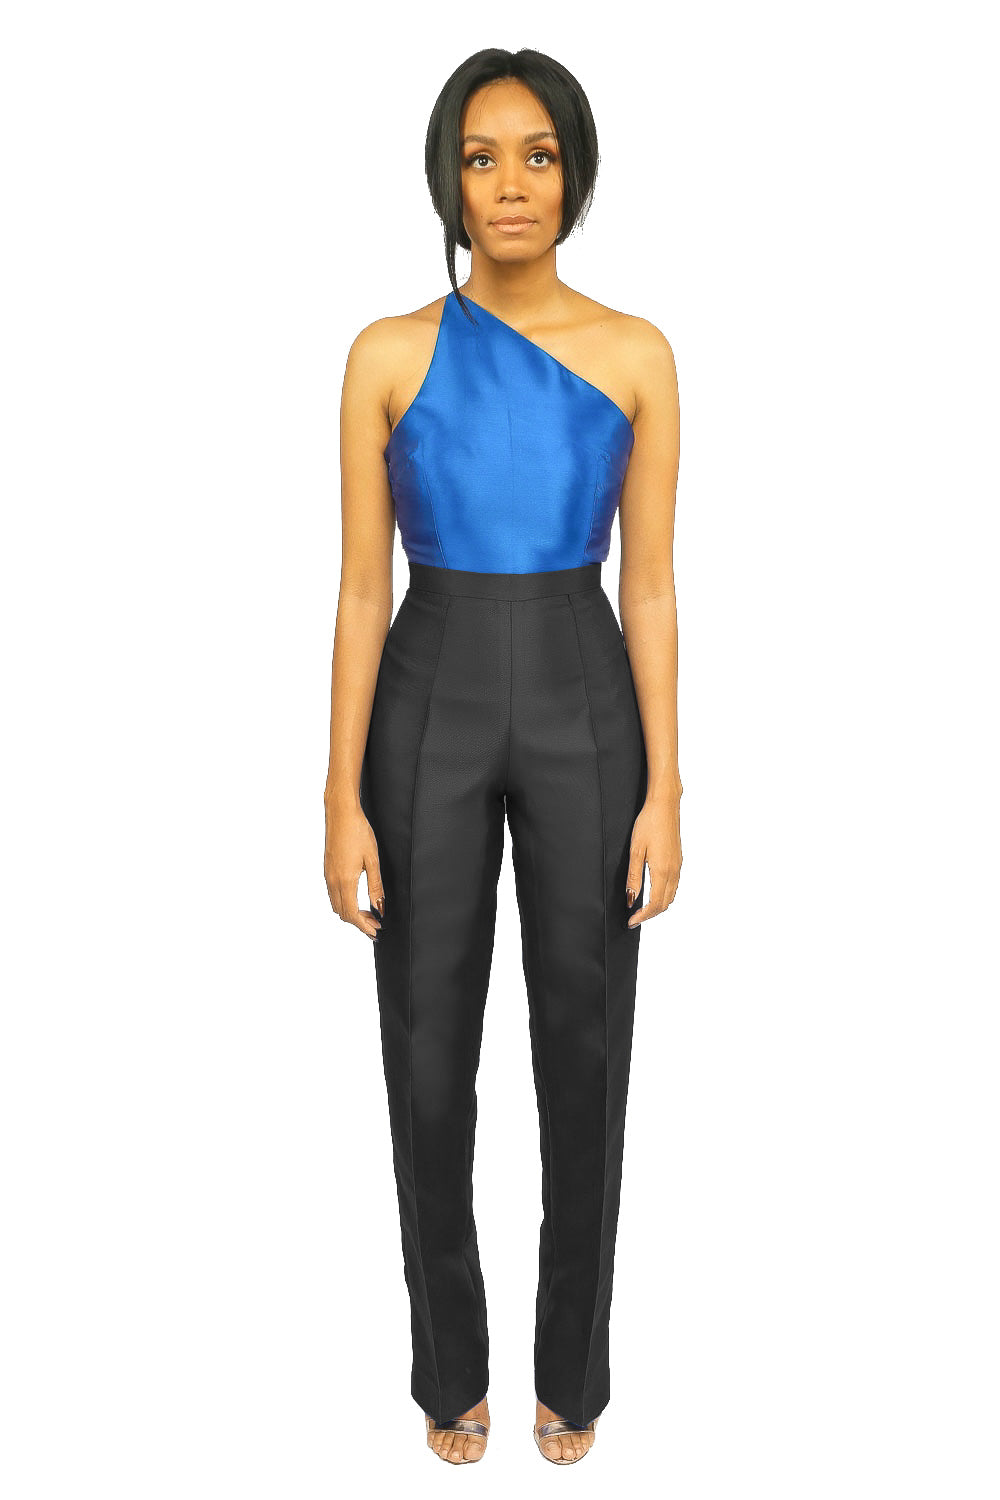 A model wearing a one-shoulder Blue Top and a Black high waist straight cut pant